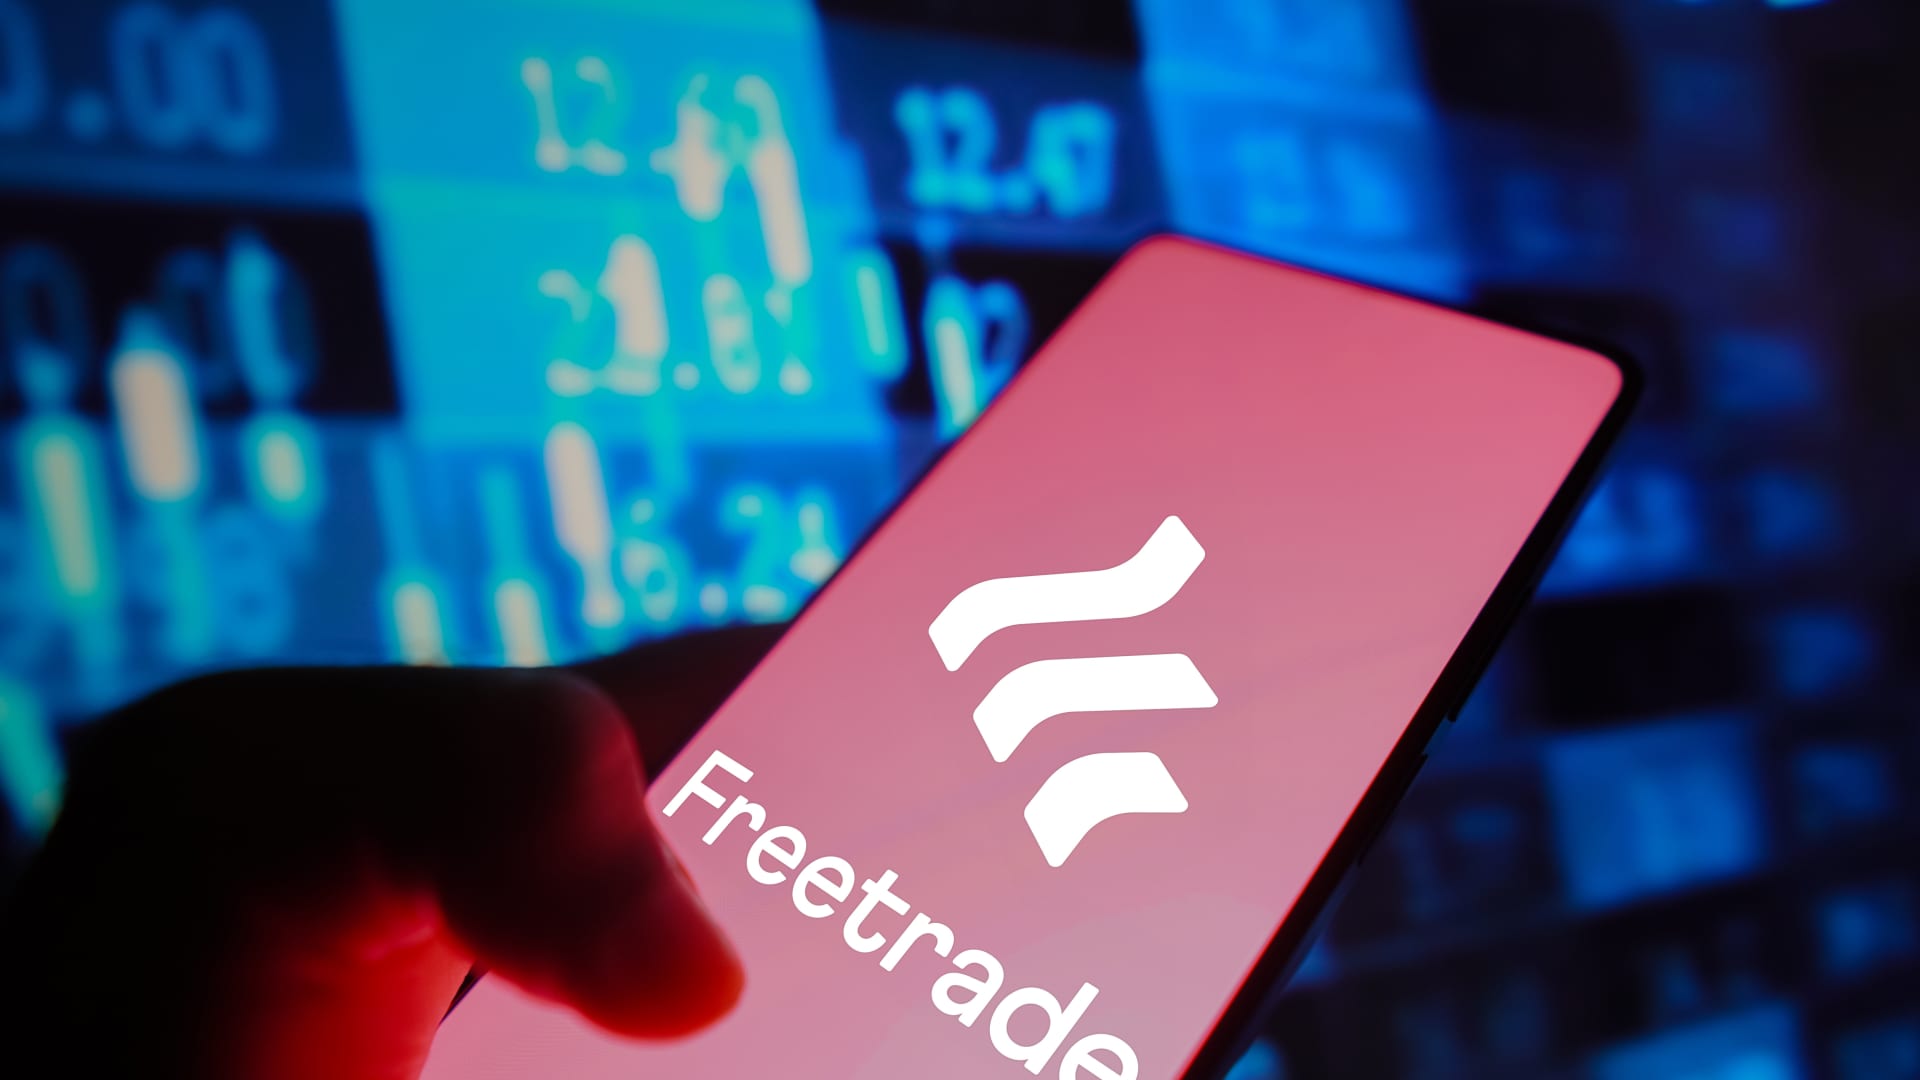 Freetrade, Britain's answer to Robinhood, posted its first quarterly profit